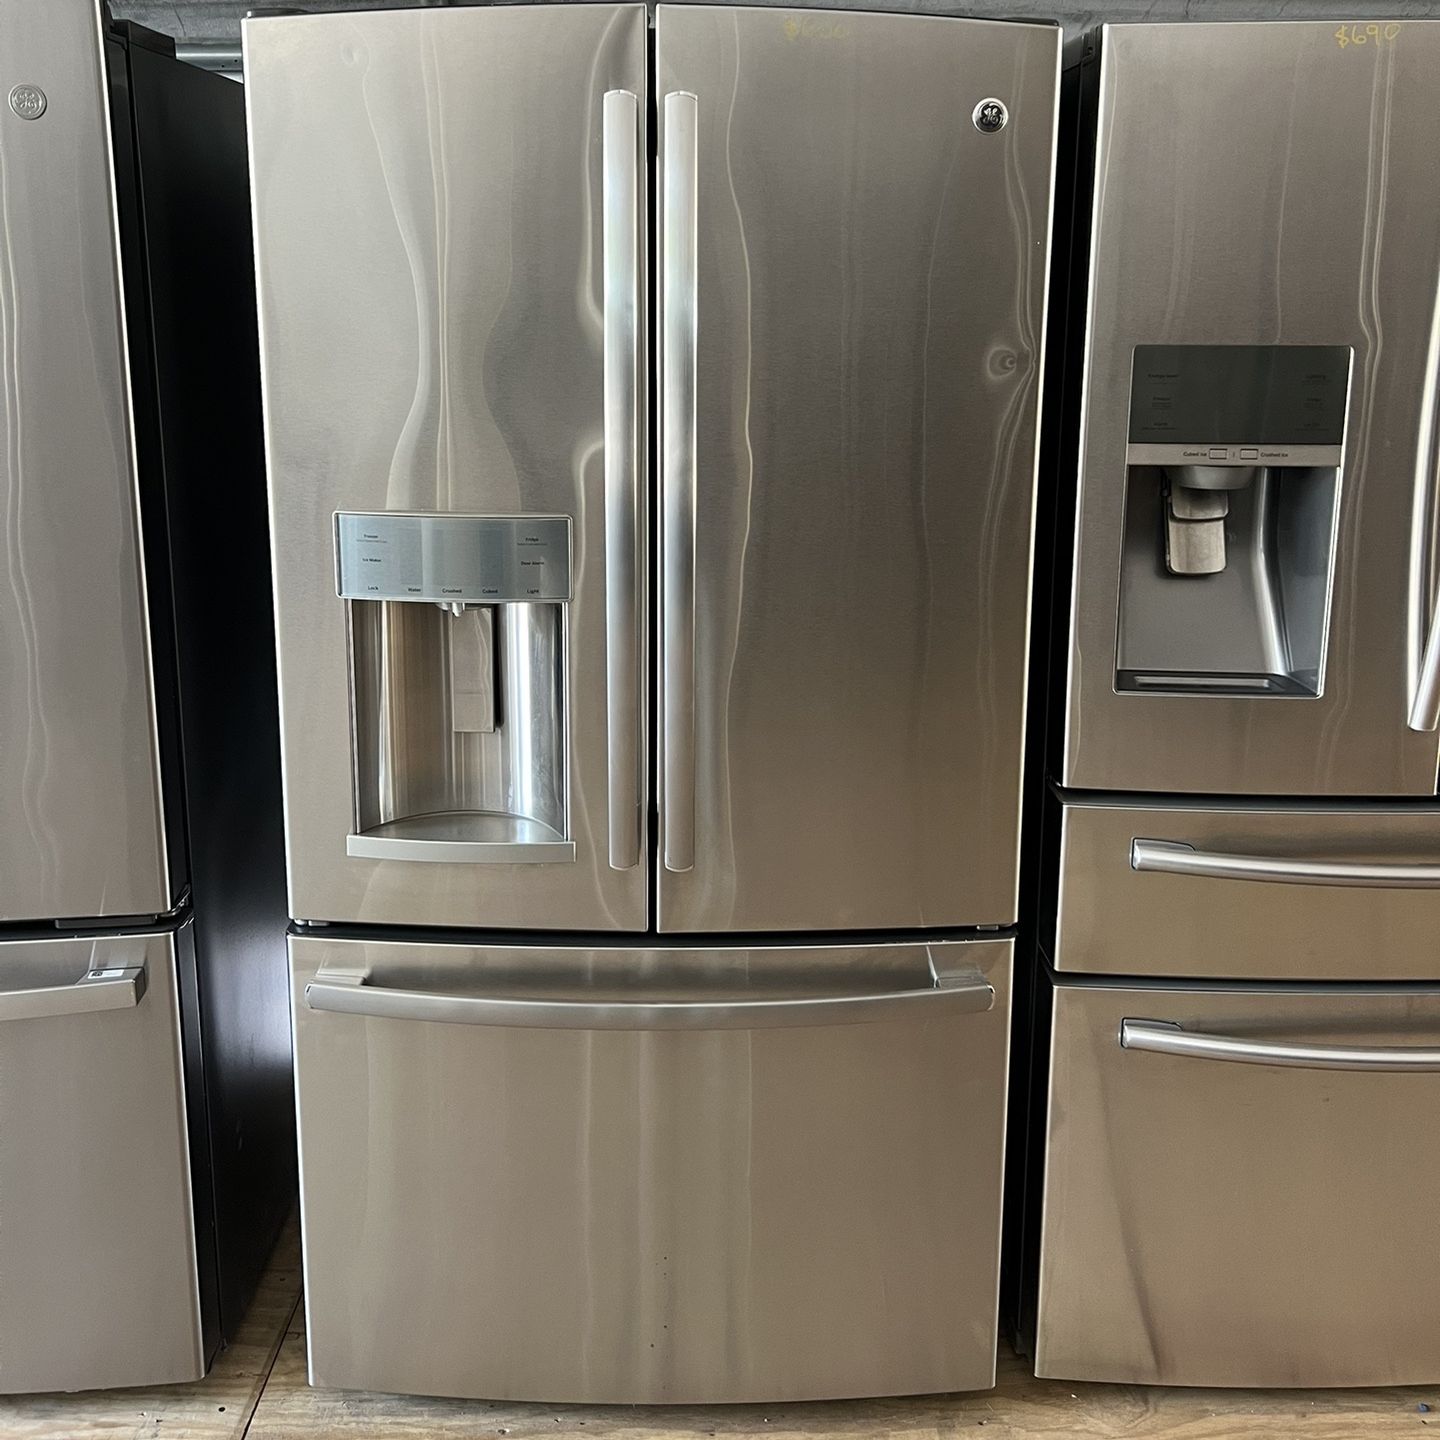 Ge Profile French Door Refrigerator   60 day warranty/ Located at:📍5415 Carmack Rd Tampa Fl 33610📍